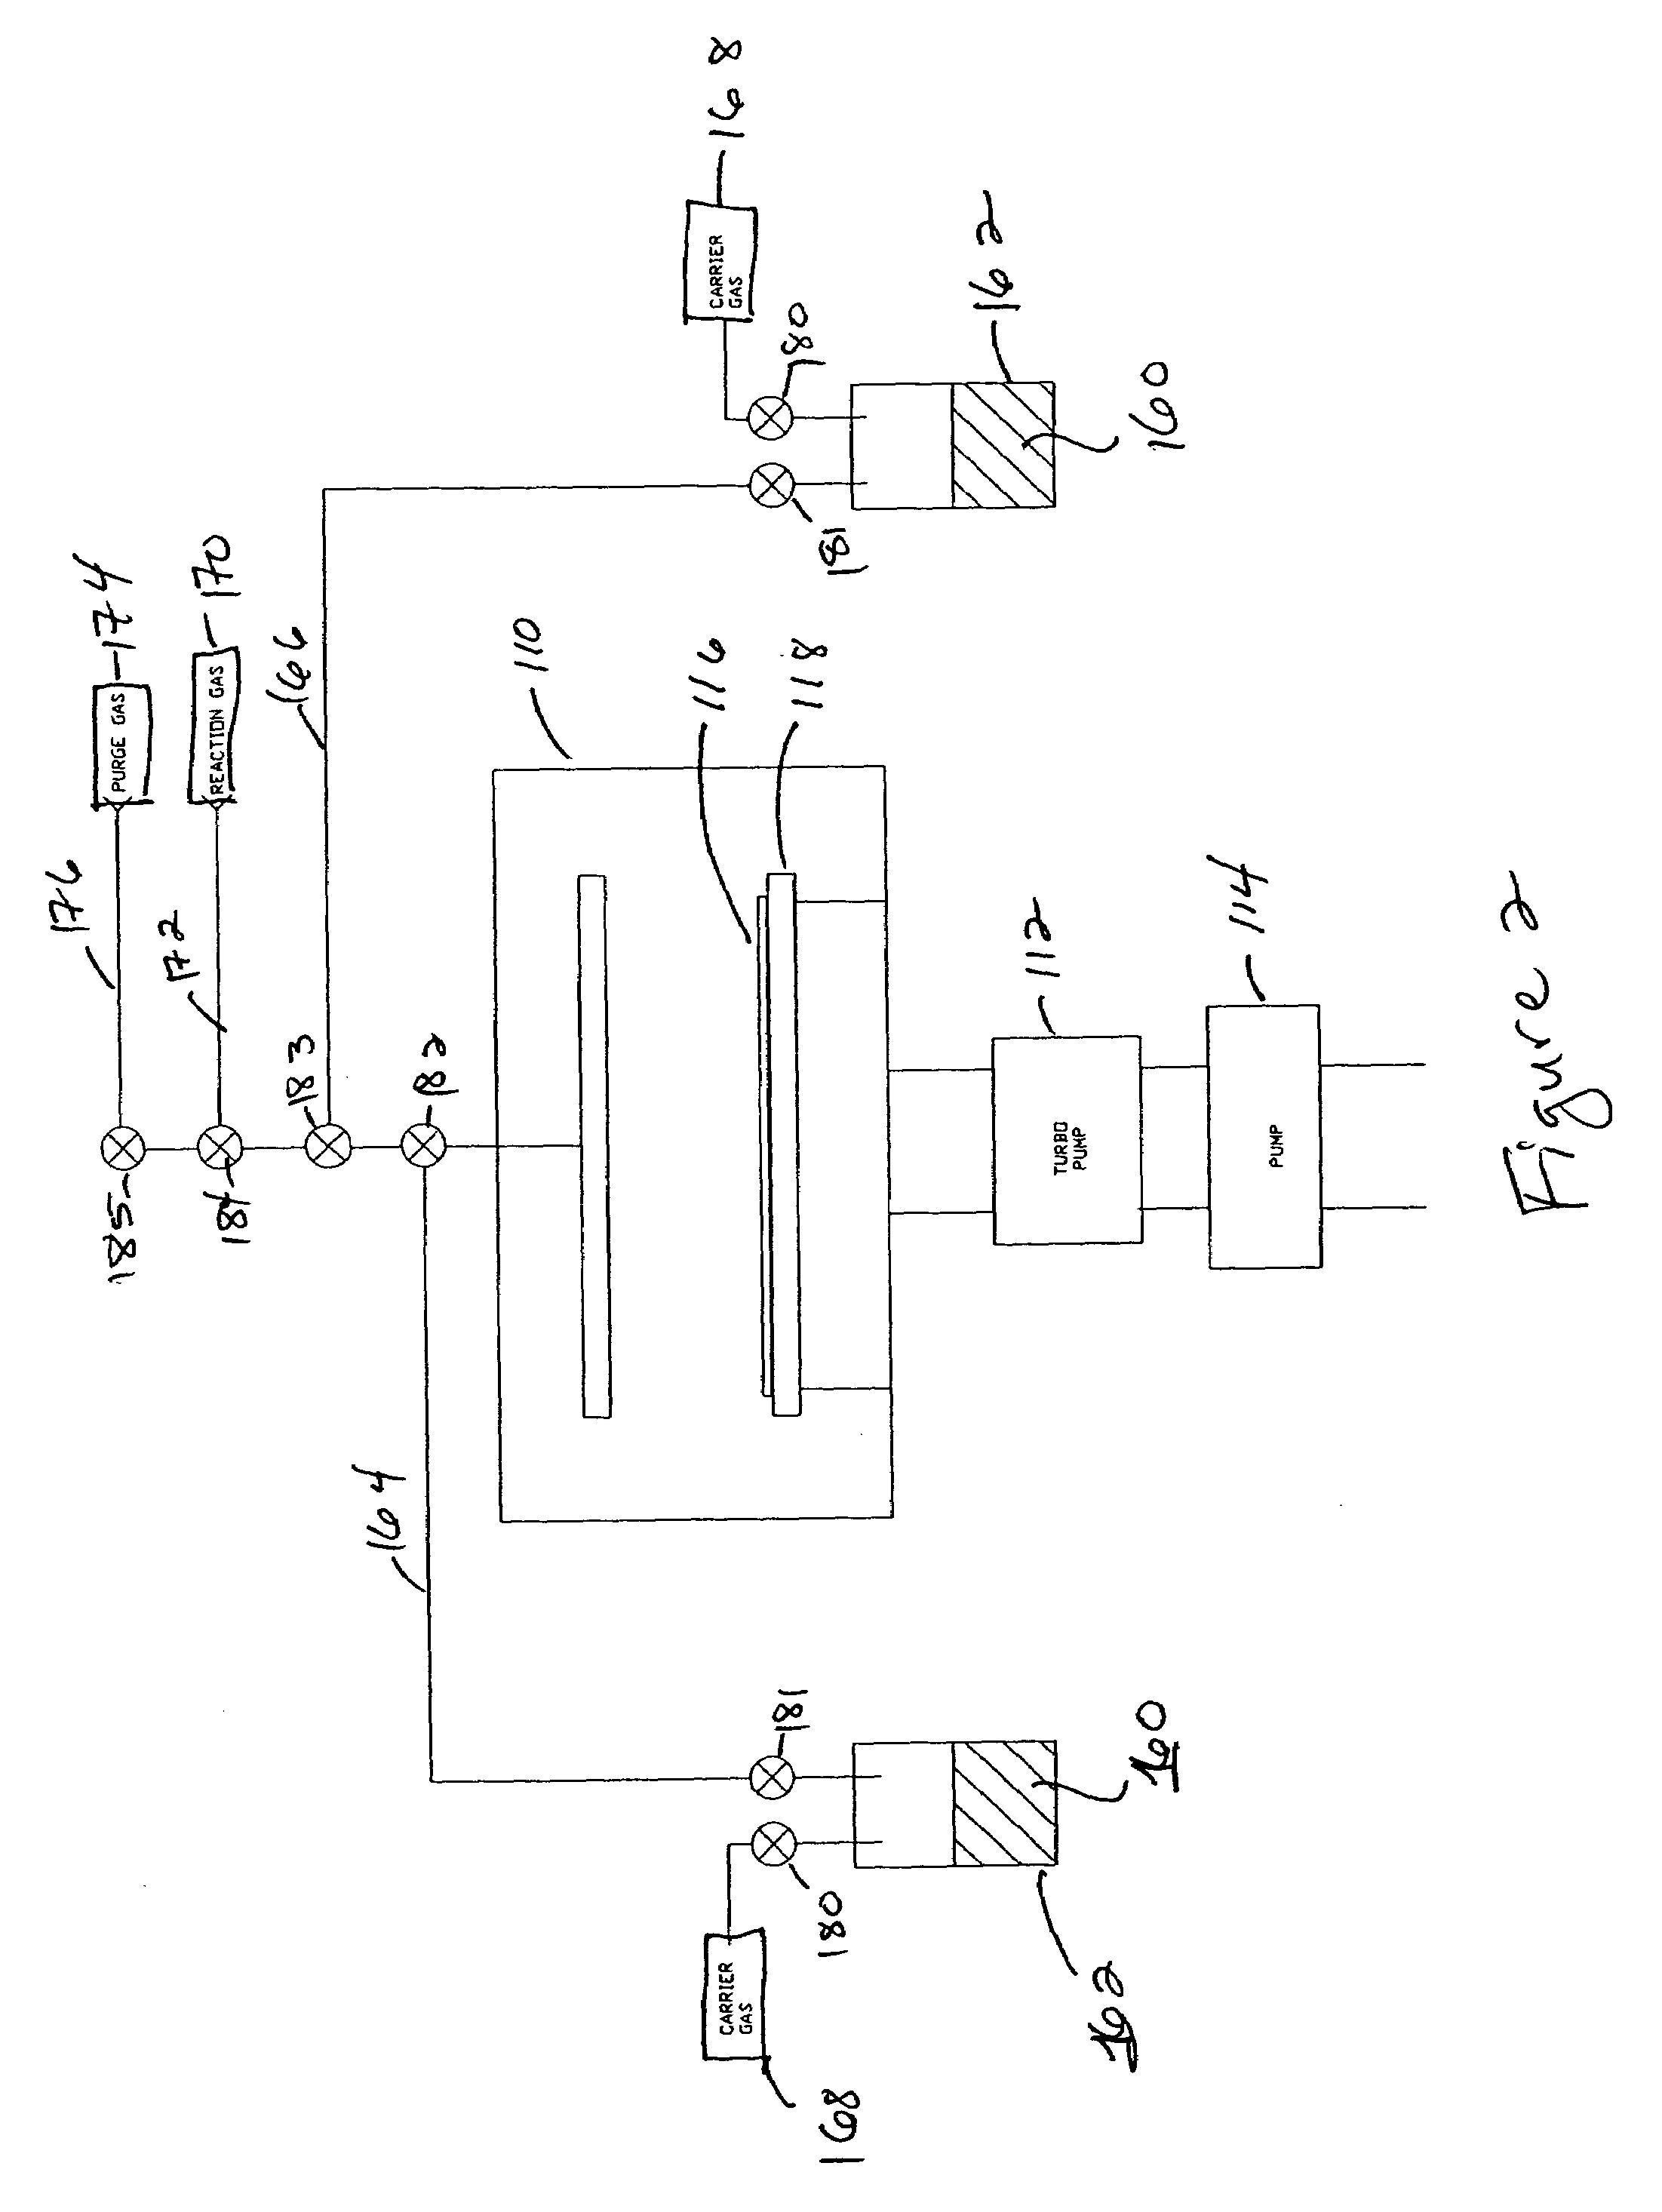 Systems and methods for forming zirconium and/or hafnium-containing layers